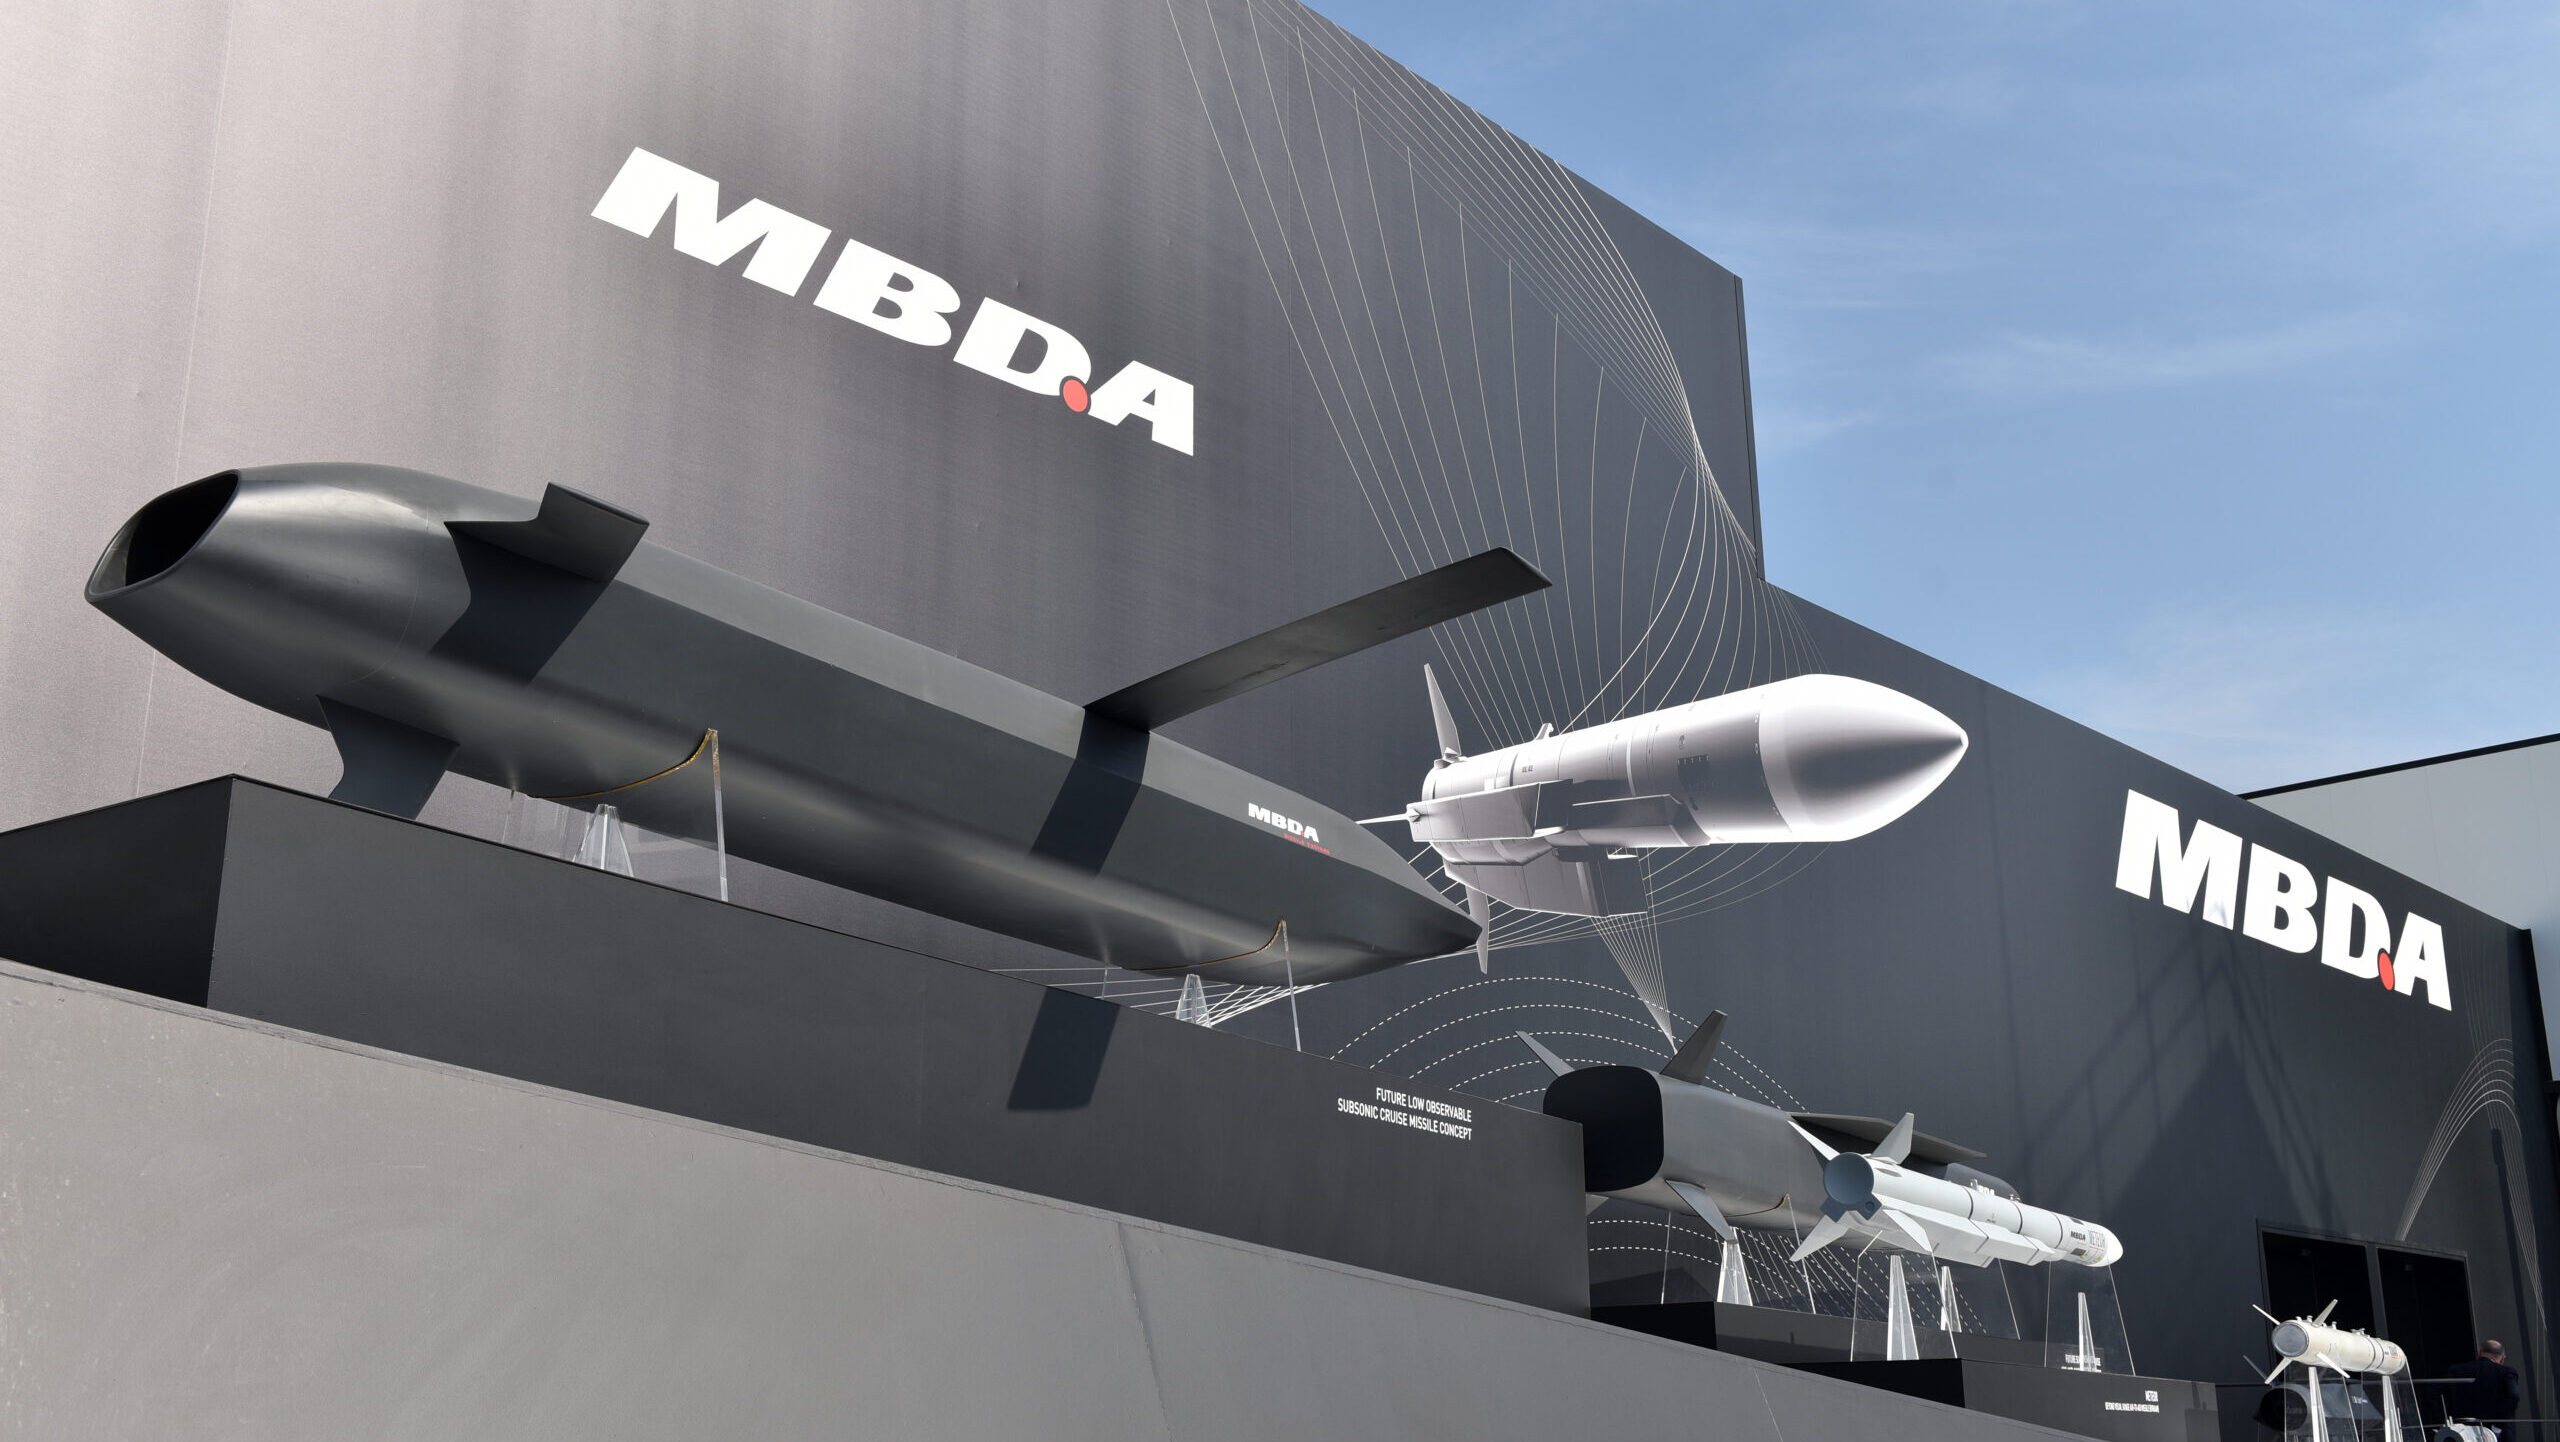 Anti-tank weapons, new materials:  MBDA Germany pondering future hypersonic capabilities